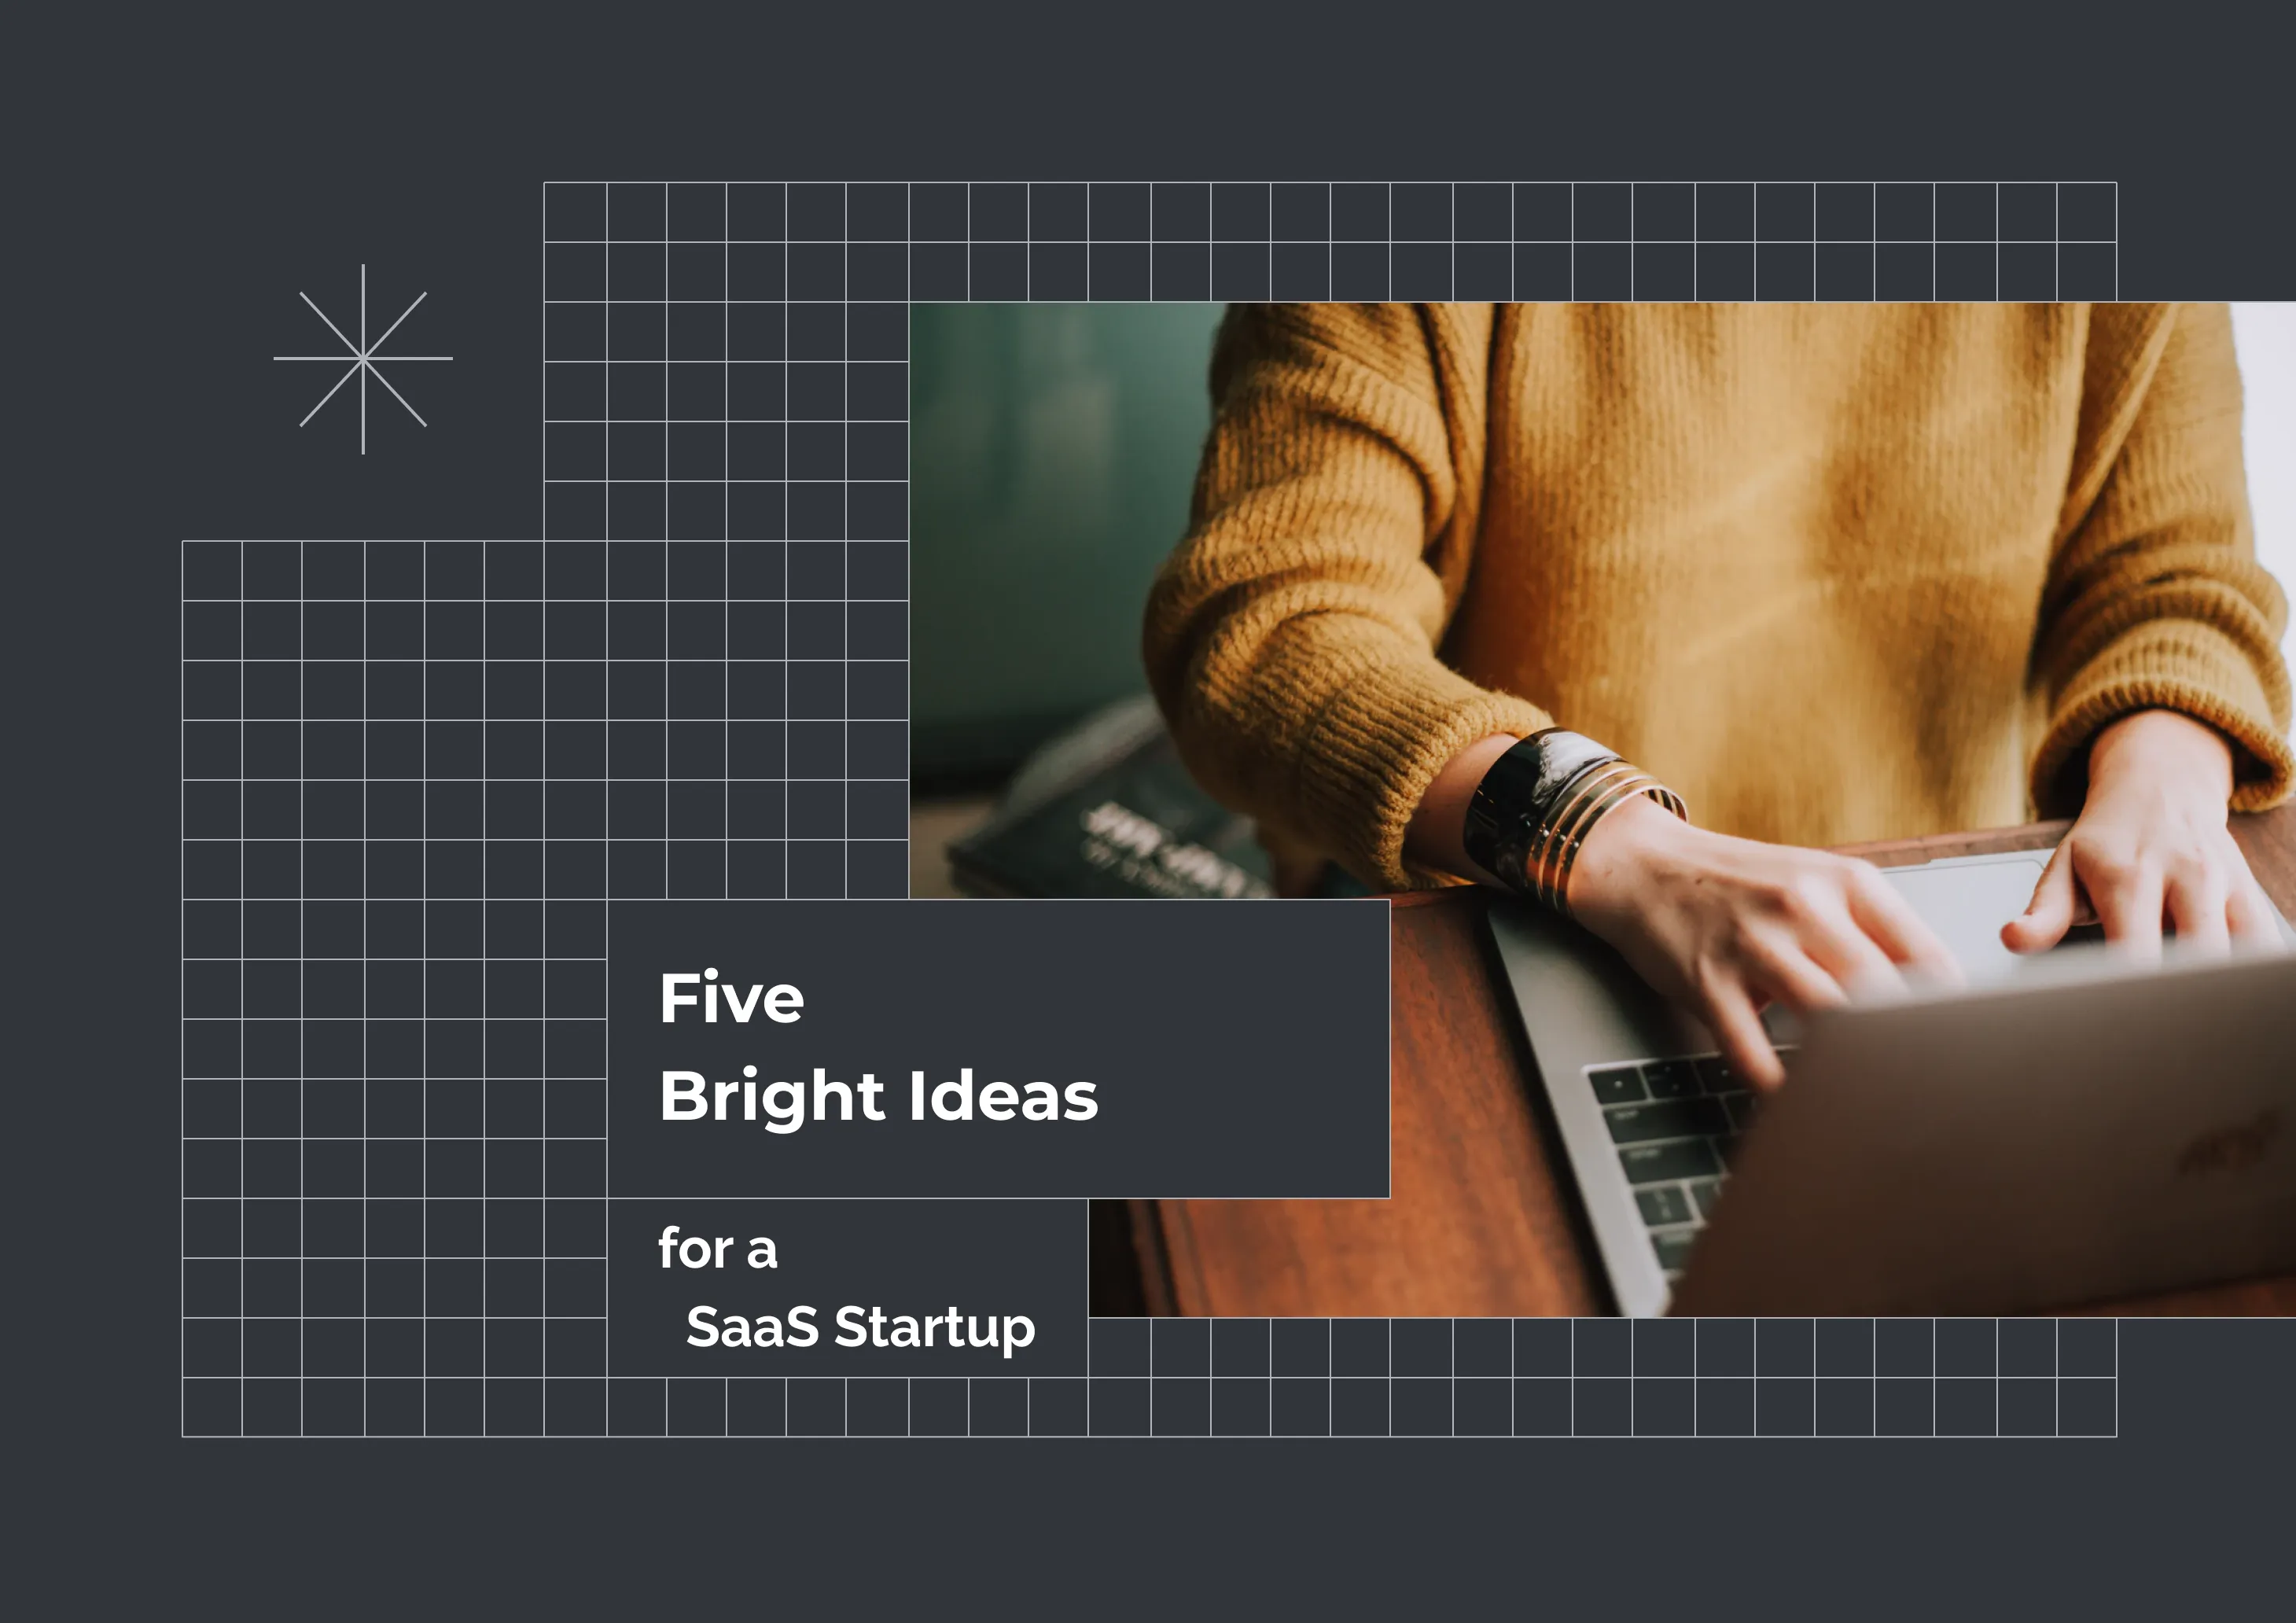 Five Bright Ideas for a SaaS Startup